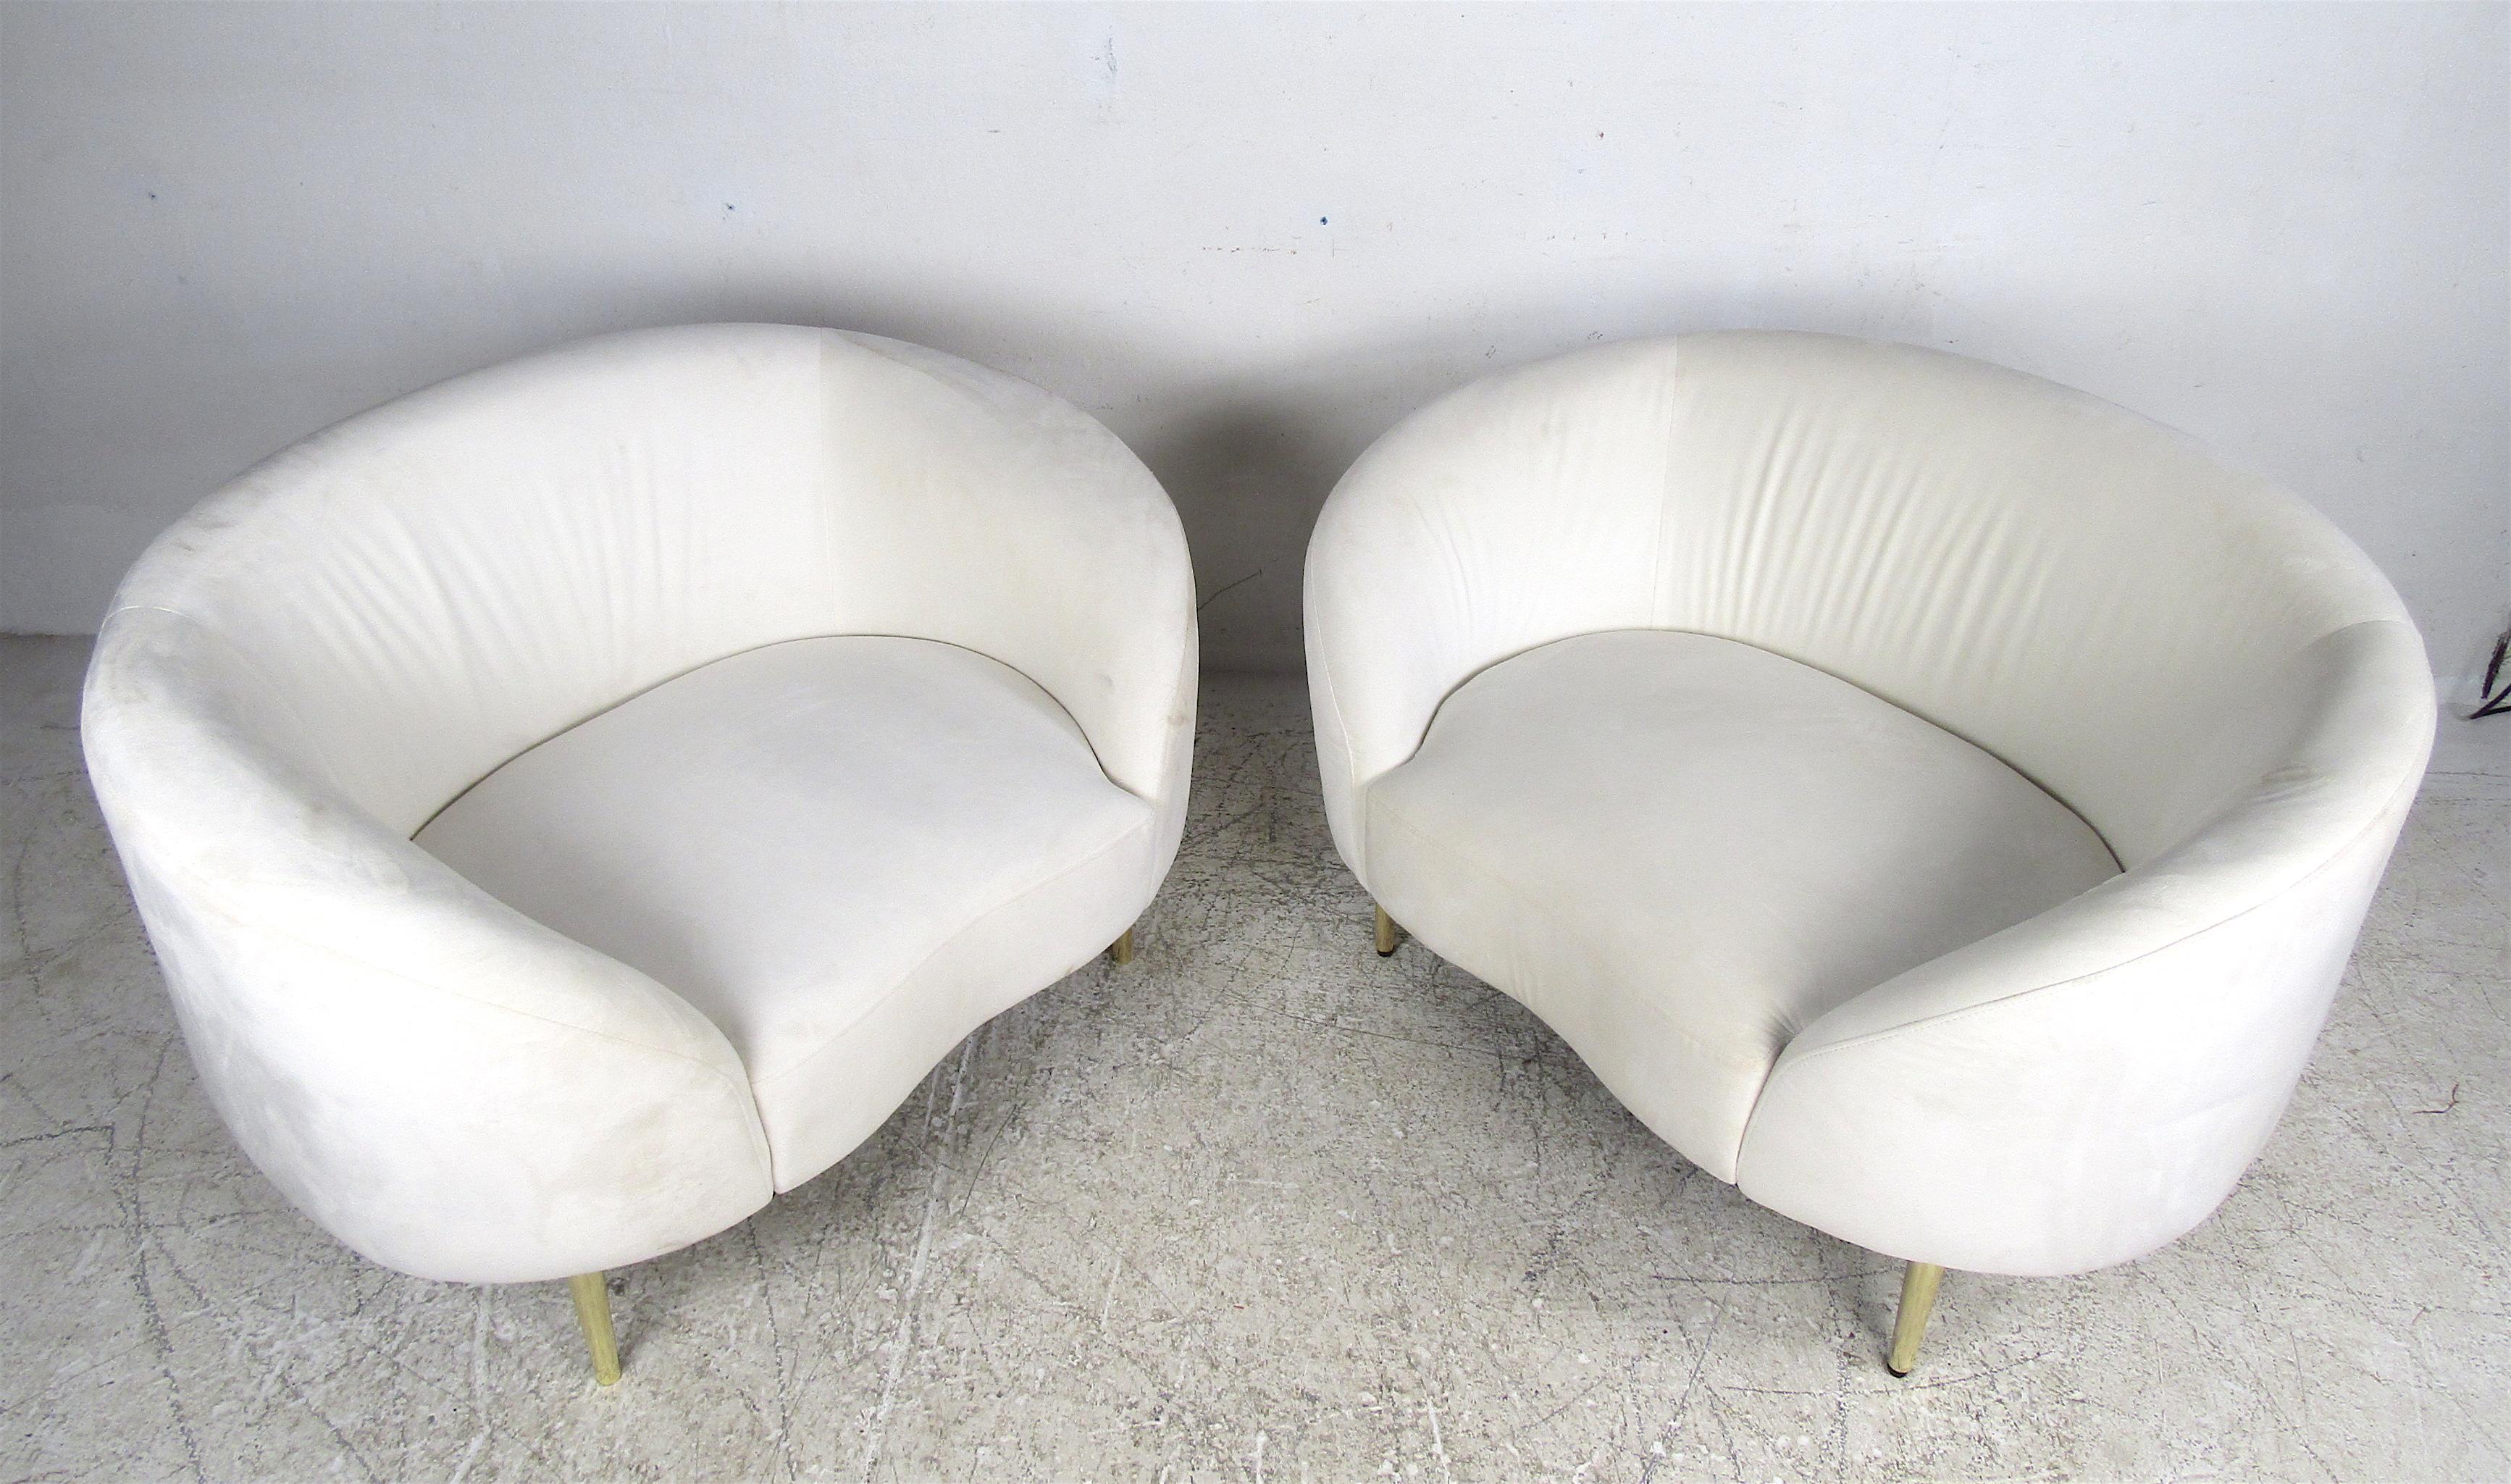 This stunning pair of vintage modern chairs feature splayed brass legs and original white velvet upholstery. A comfortable and sleek design that makes these incredibly desirable. The perfect fit for any home, business, or office. Please confirm the